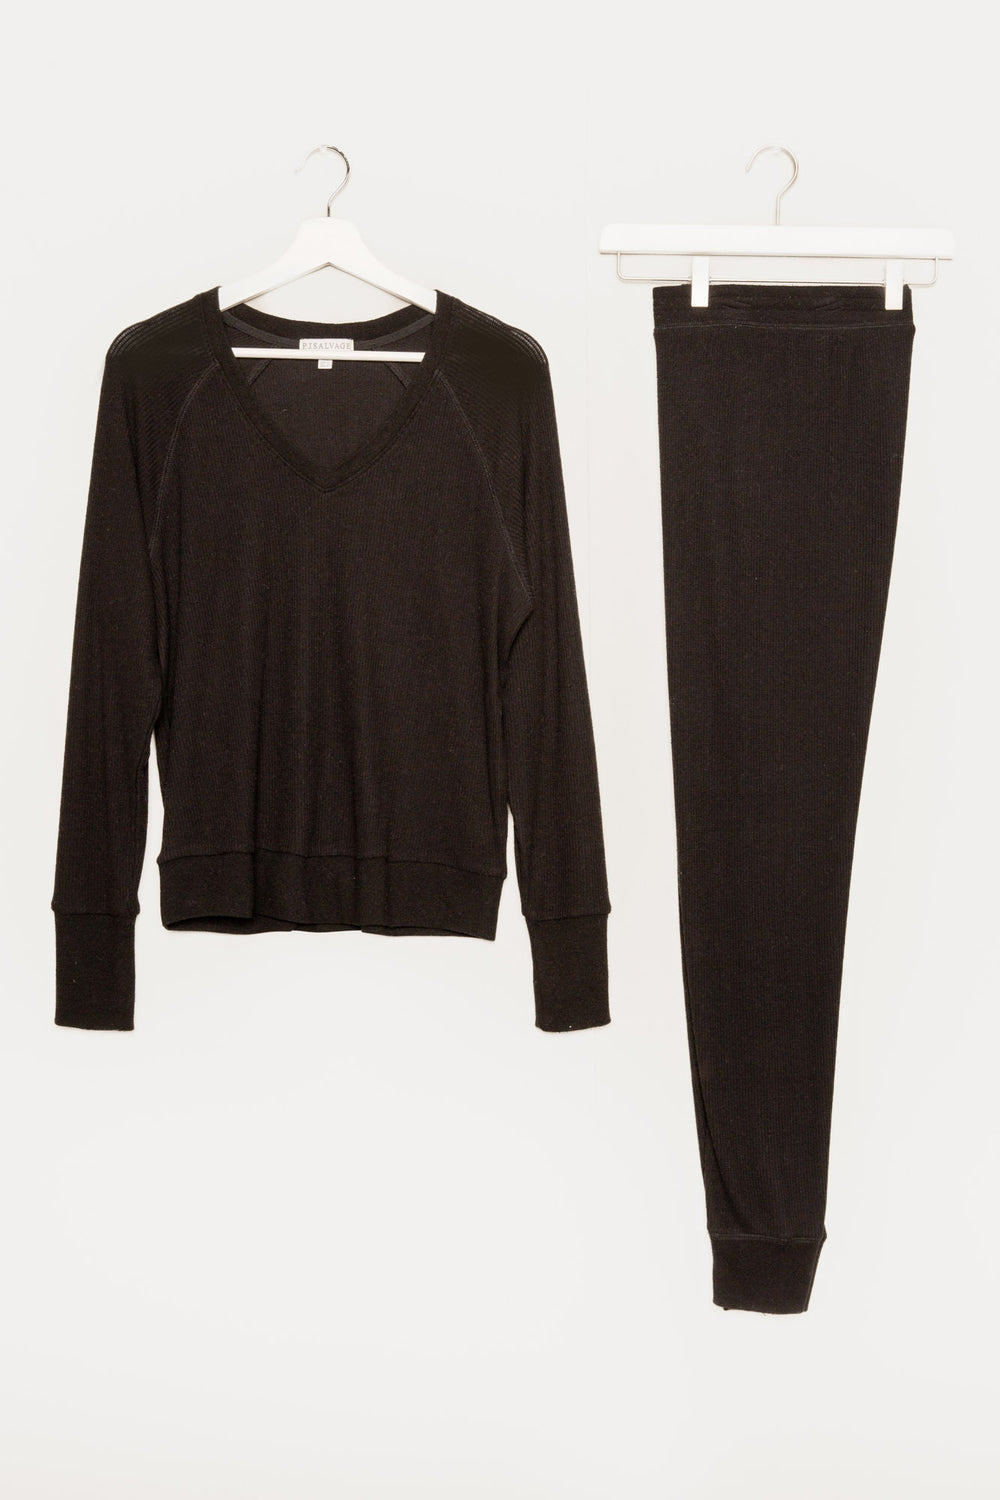 black jammie set in 2x2 peachy rib with a slim fit jammie pant & V-neck long sleeve top. (7199531991140)